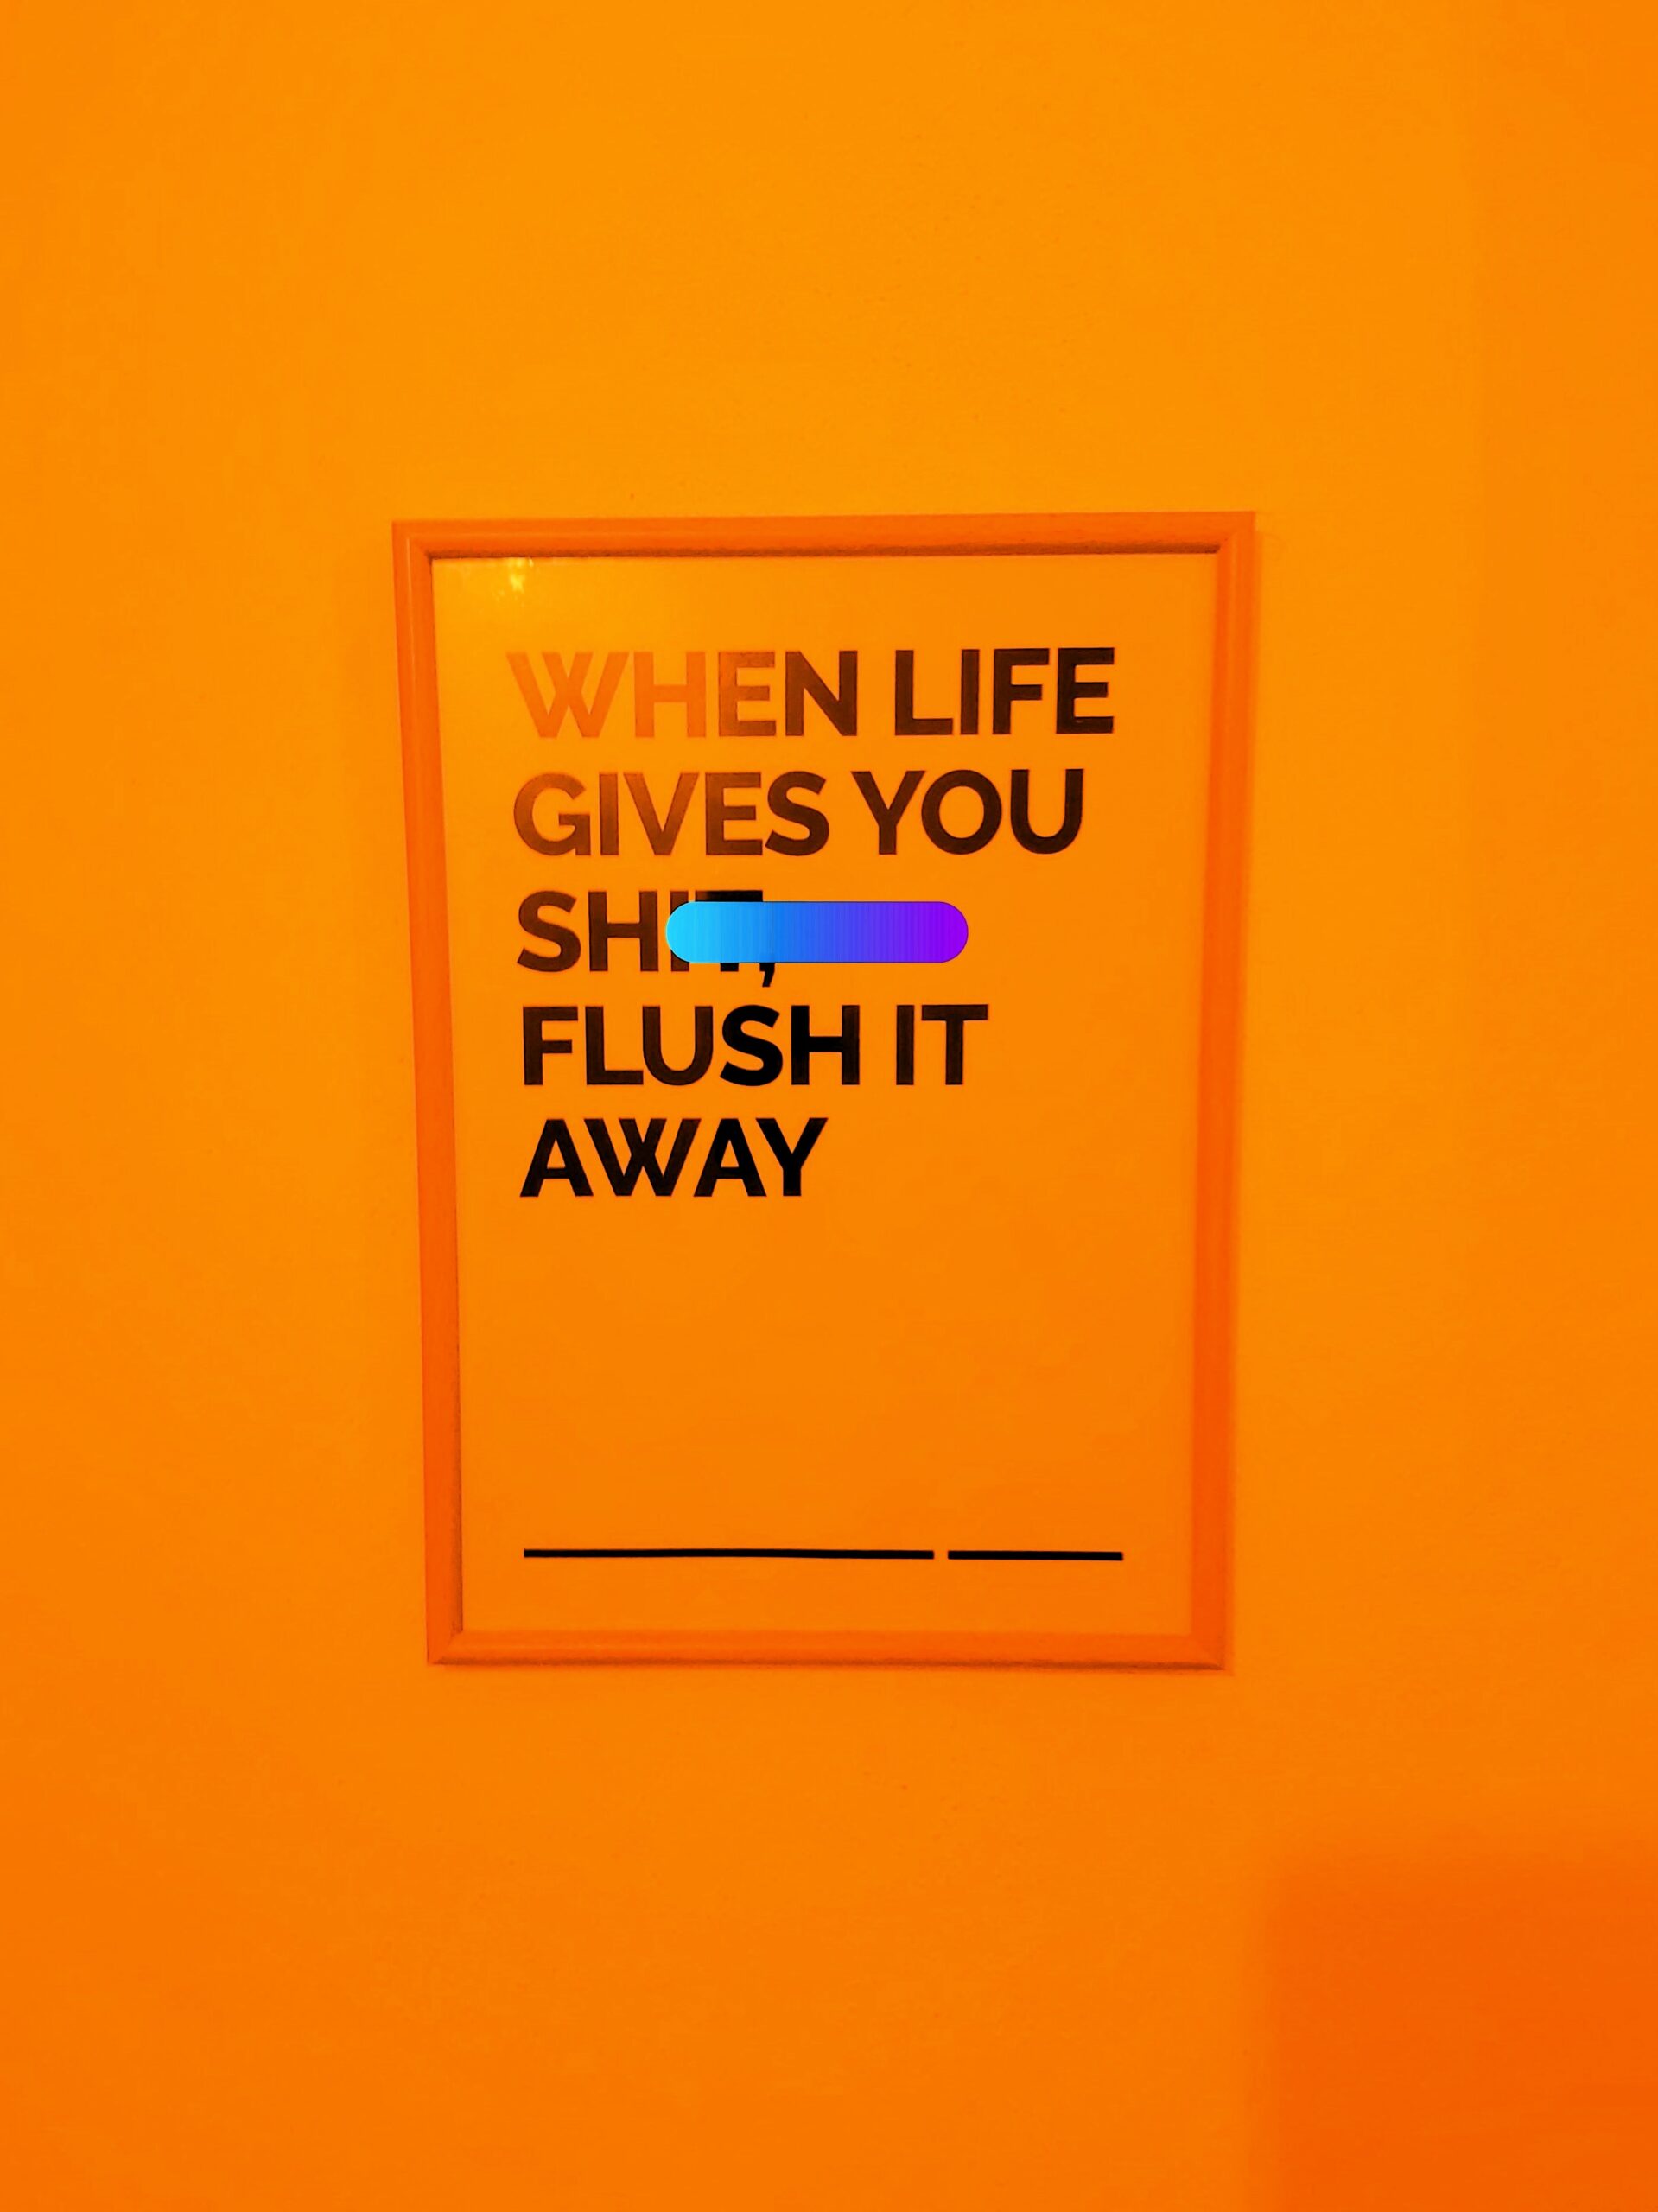 A toilet poster with "when life gives you sh*t, flush it away" in Timisoara, Romania.